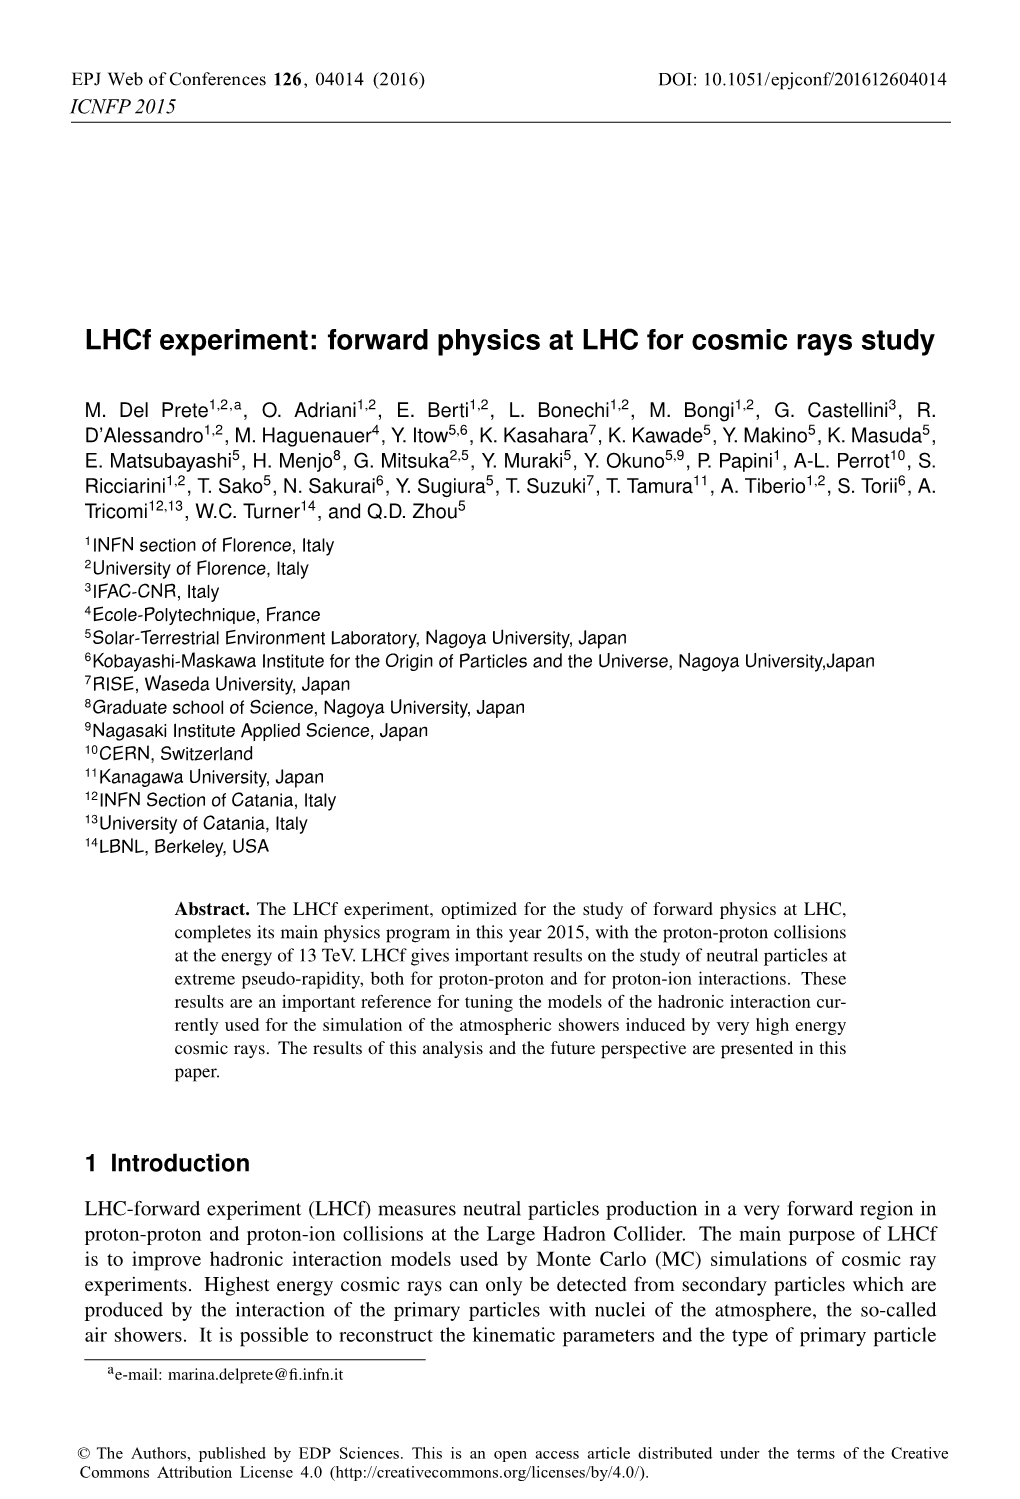 Lhcf Experiment: Forward Physics at LHC for Cosmic Rays Study